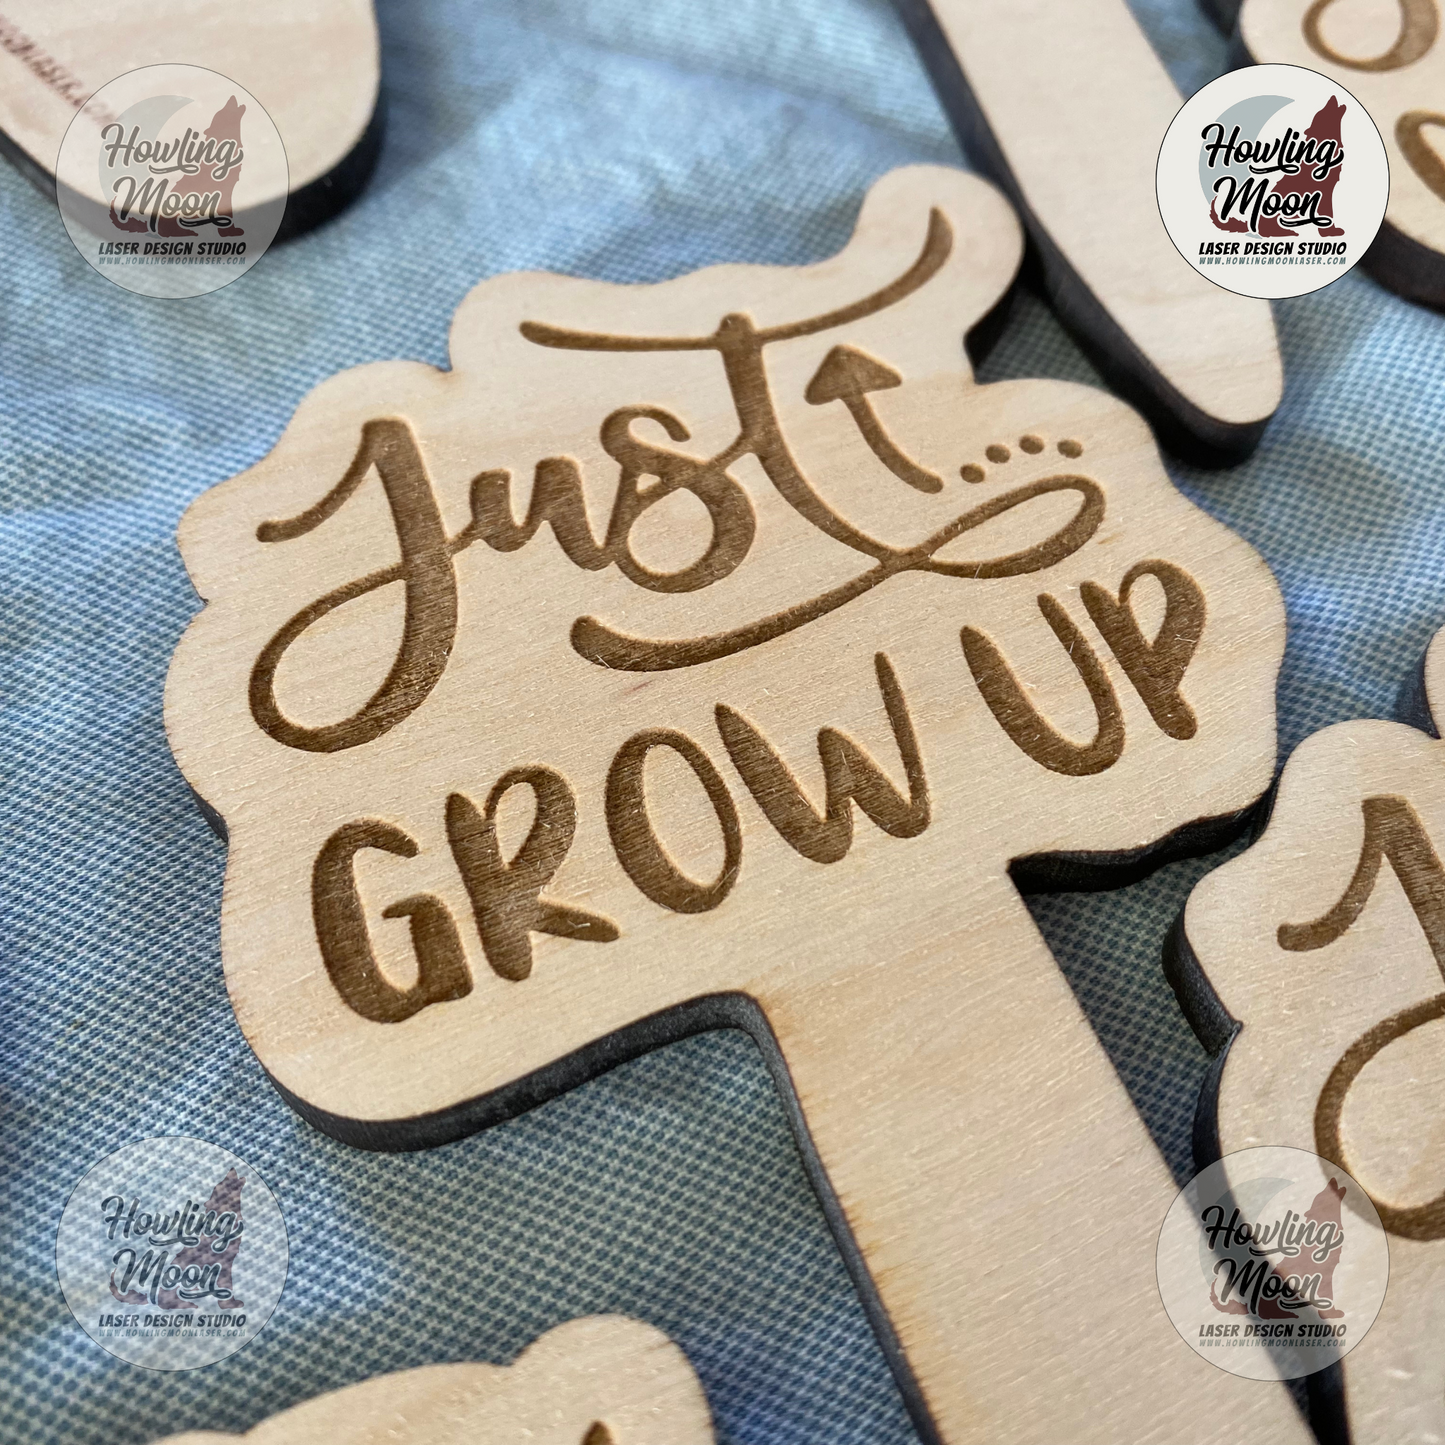 Just Grow Up Funny Plant Stake Garden Marker